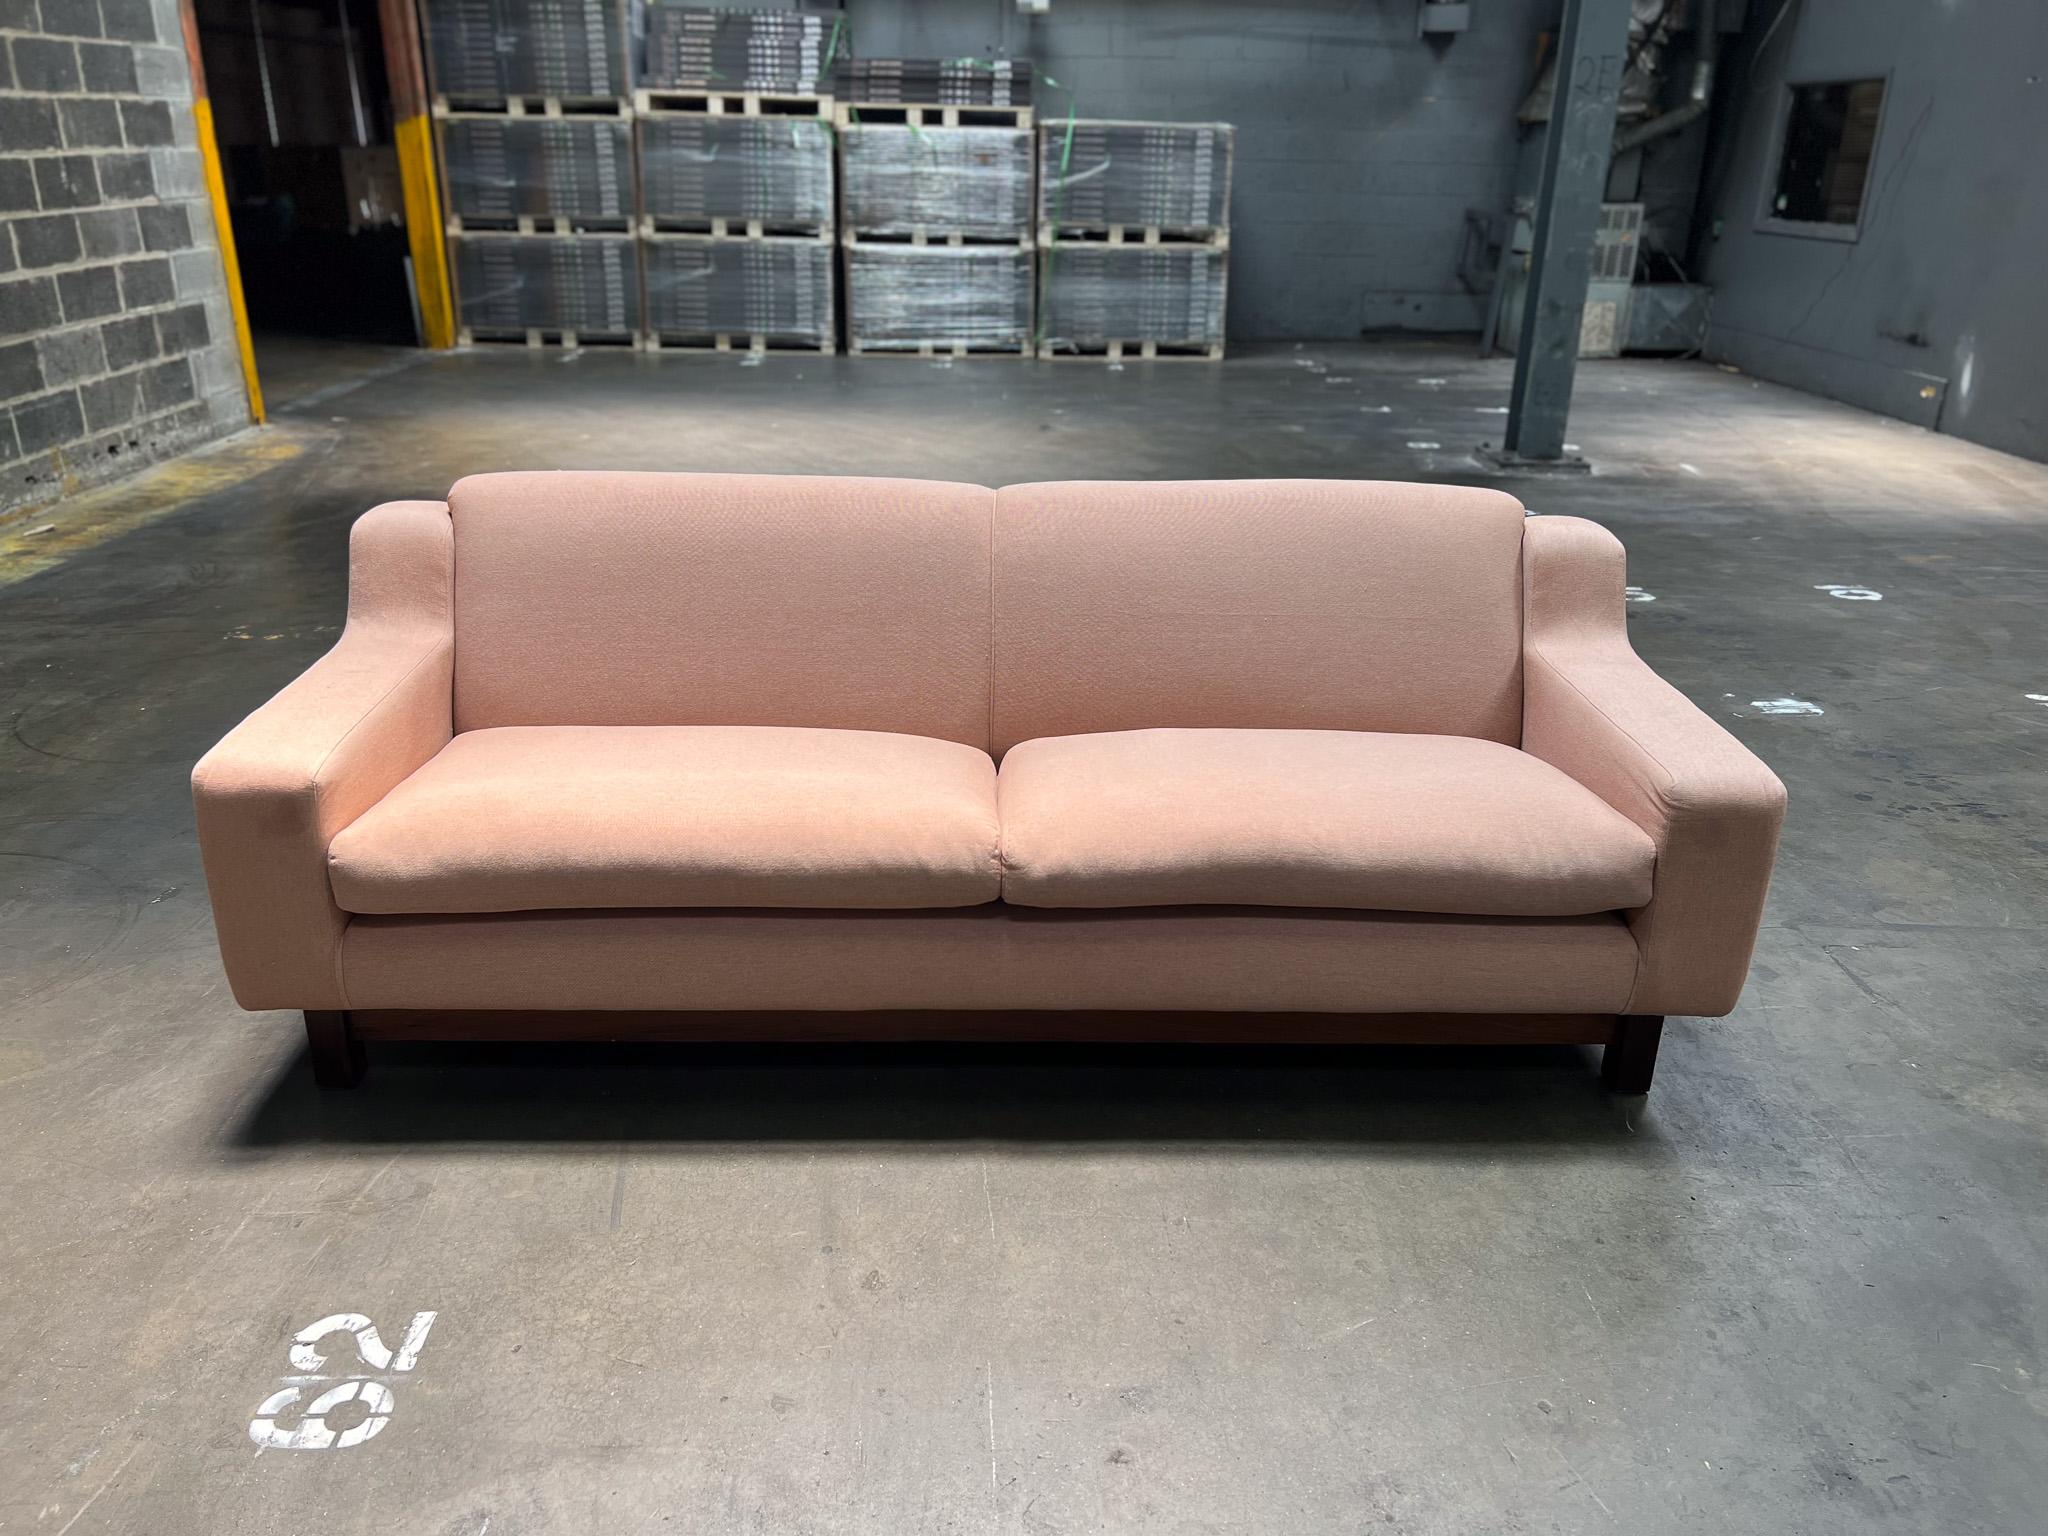 Hand-Crafted Brazilian Modern Sofa in Pink Linen & Hardwood, Sergio Rodrigues, 1960  For Sale